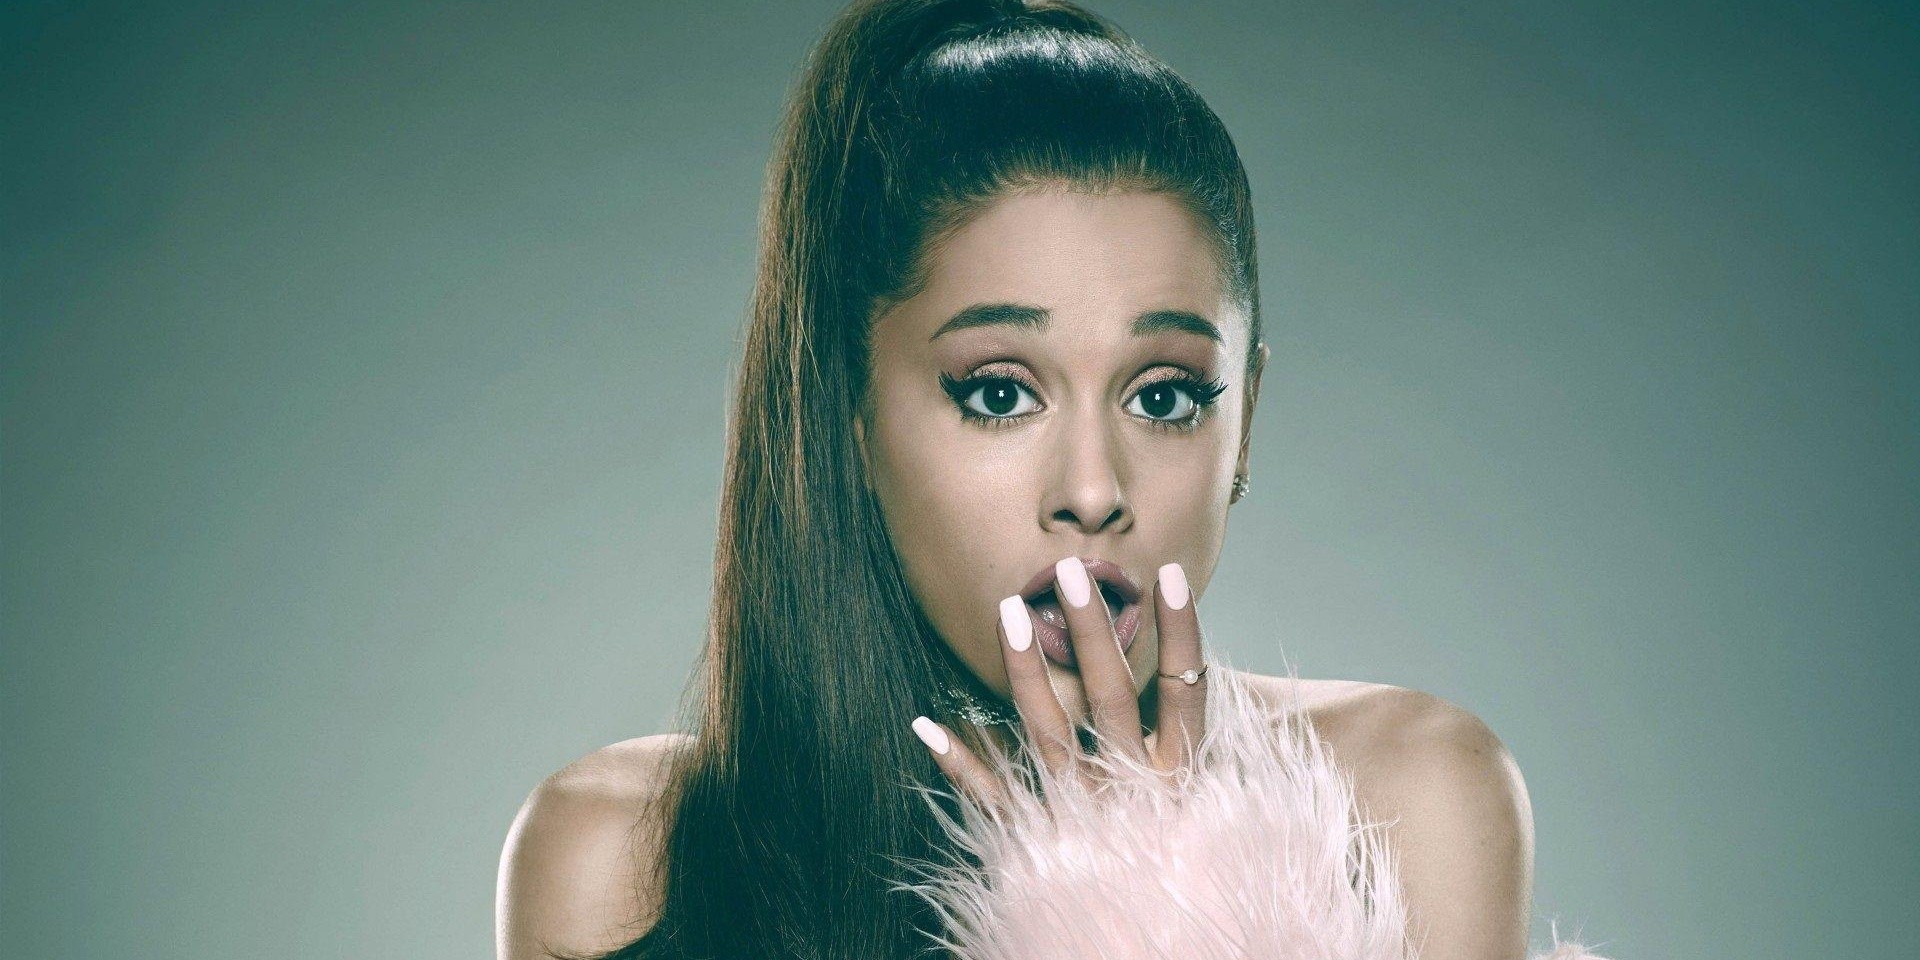 Find out which artist has knocked Ariana Grande off the number one spot on Spotify